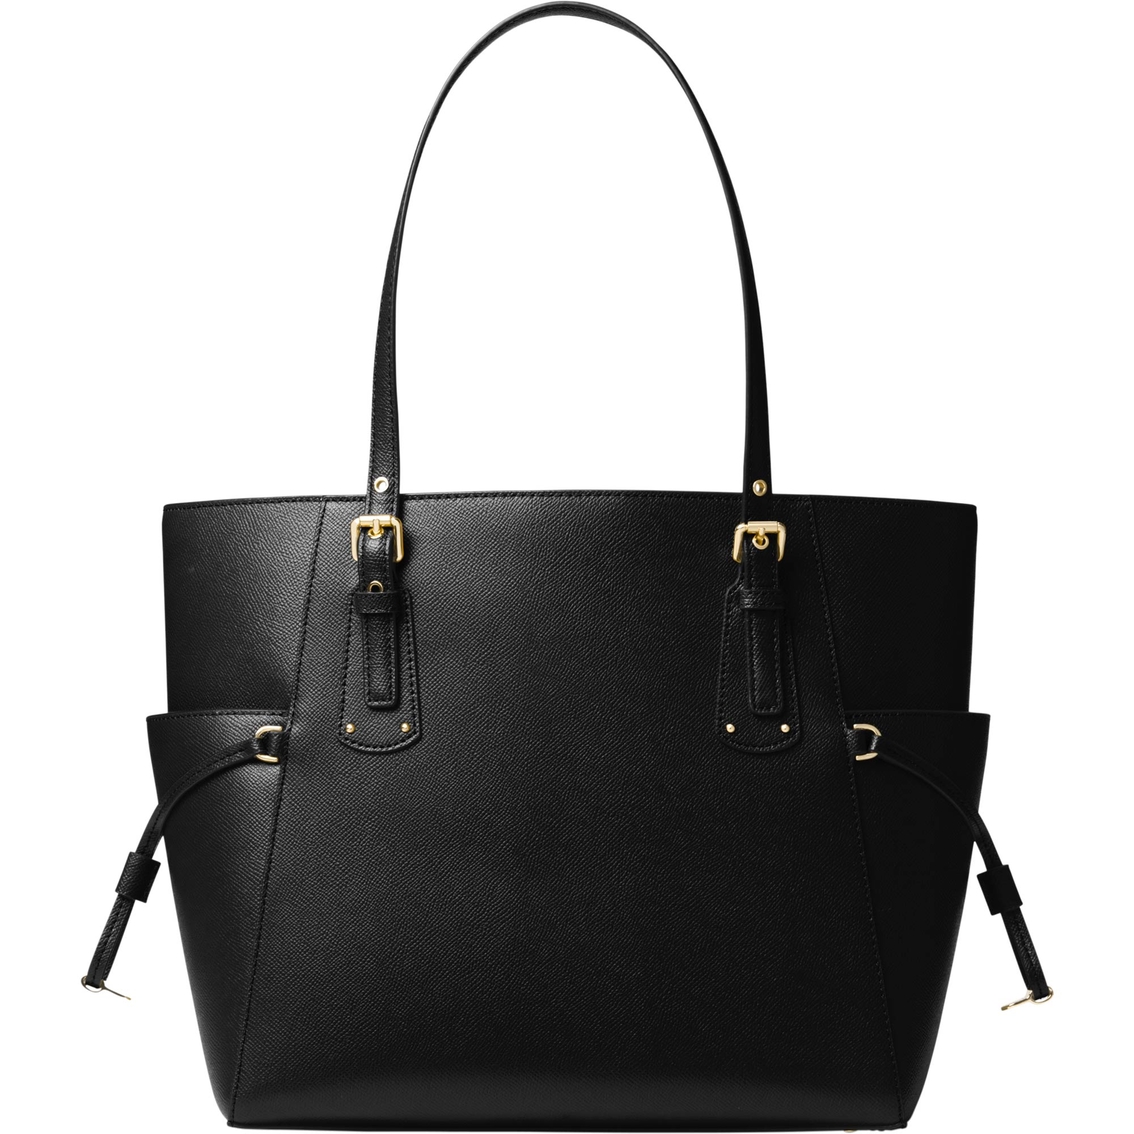 Michael Kors Voyager East West Tote - Image 2 of 3